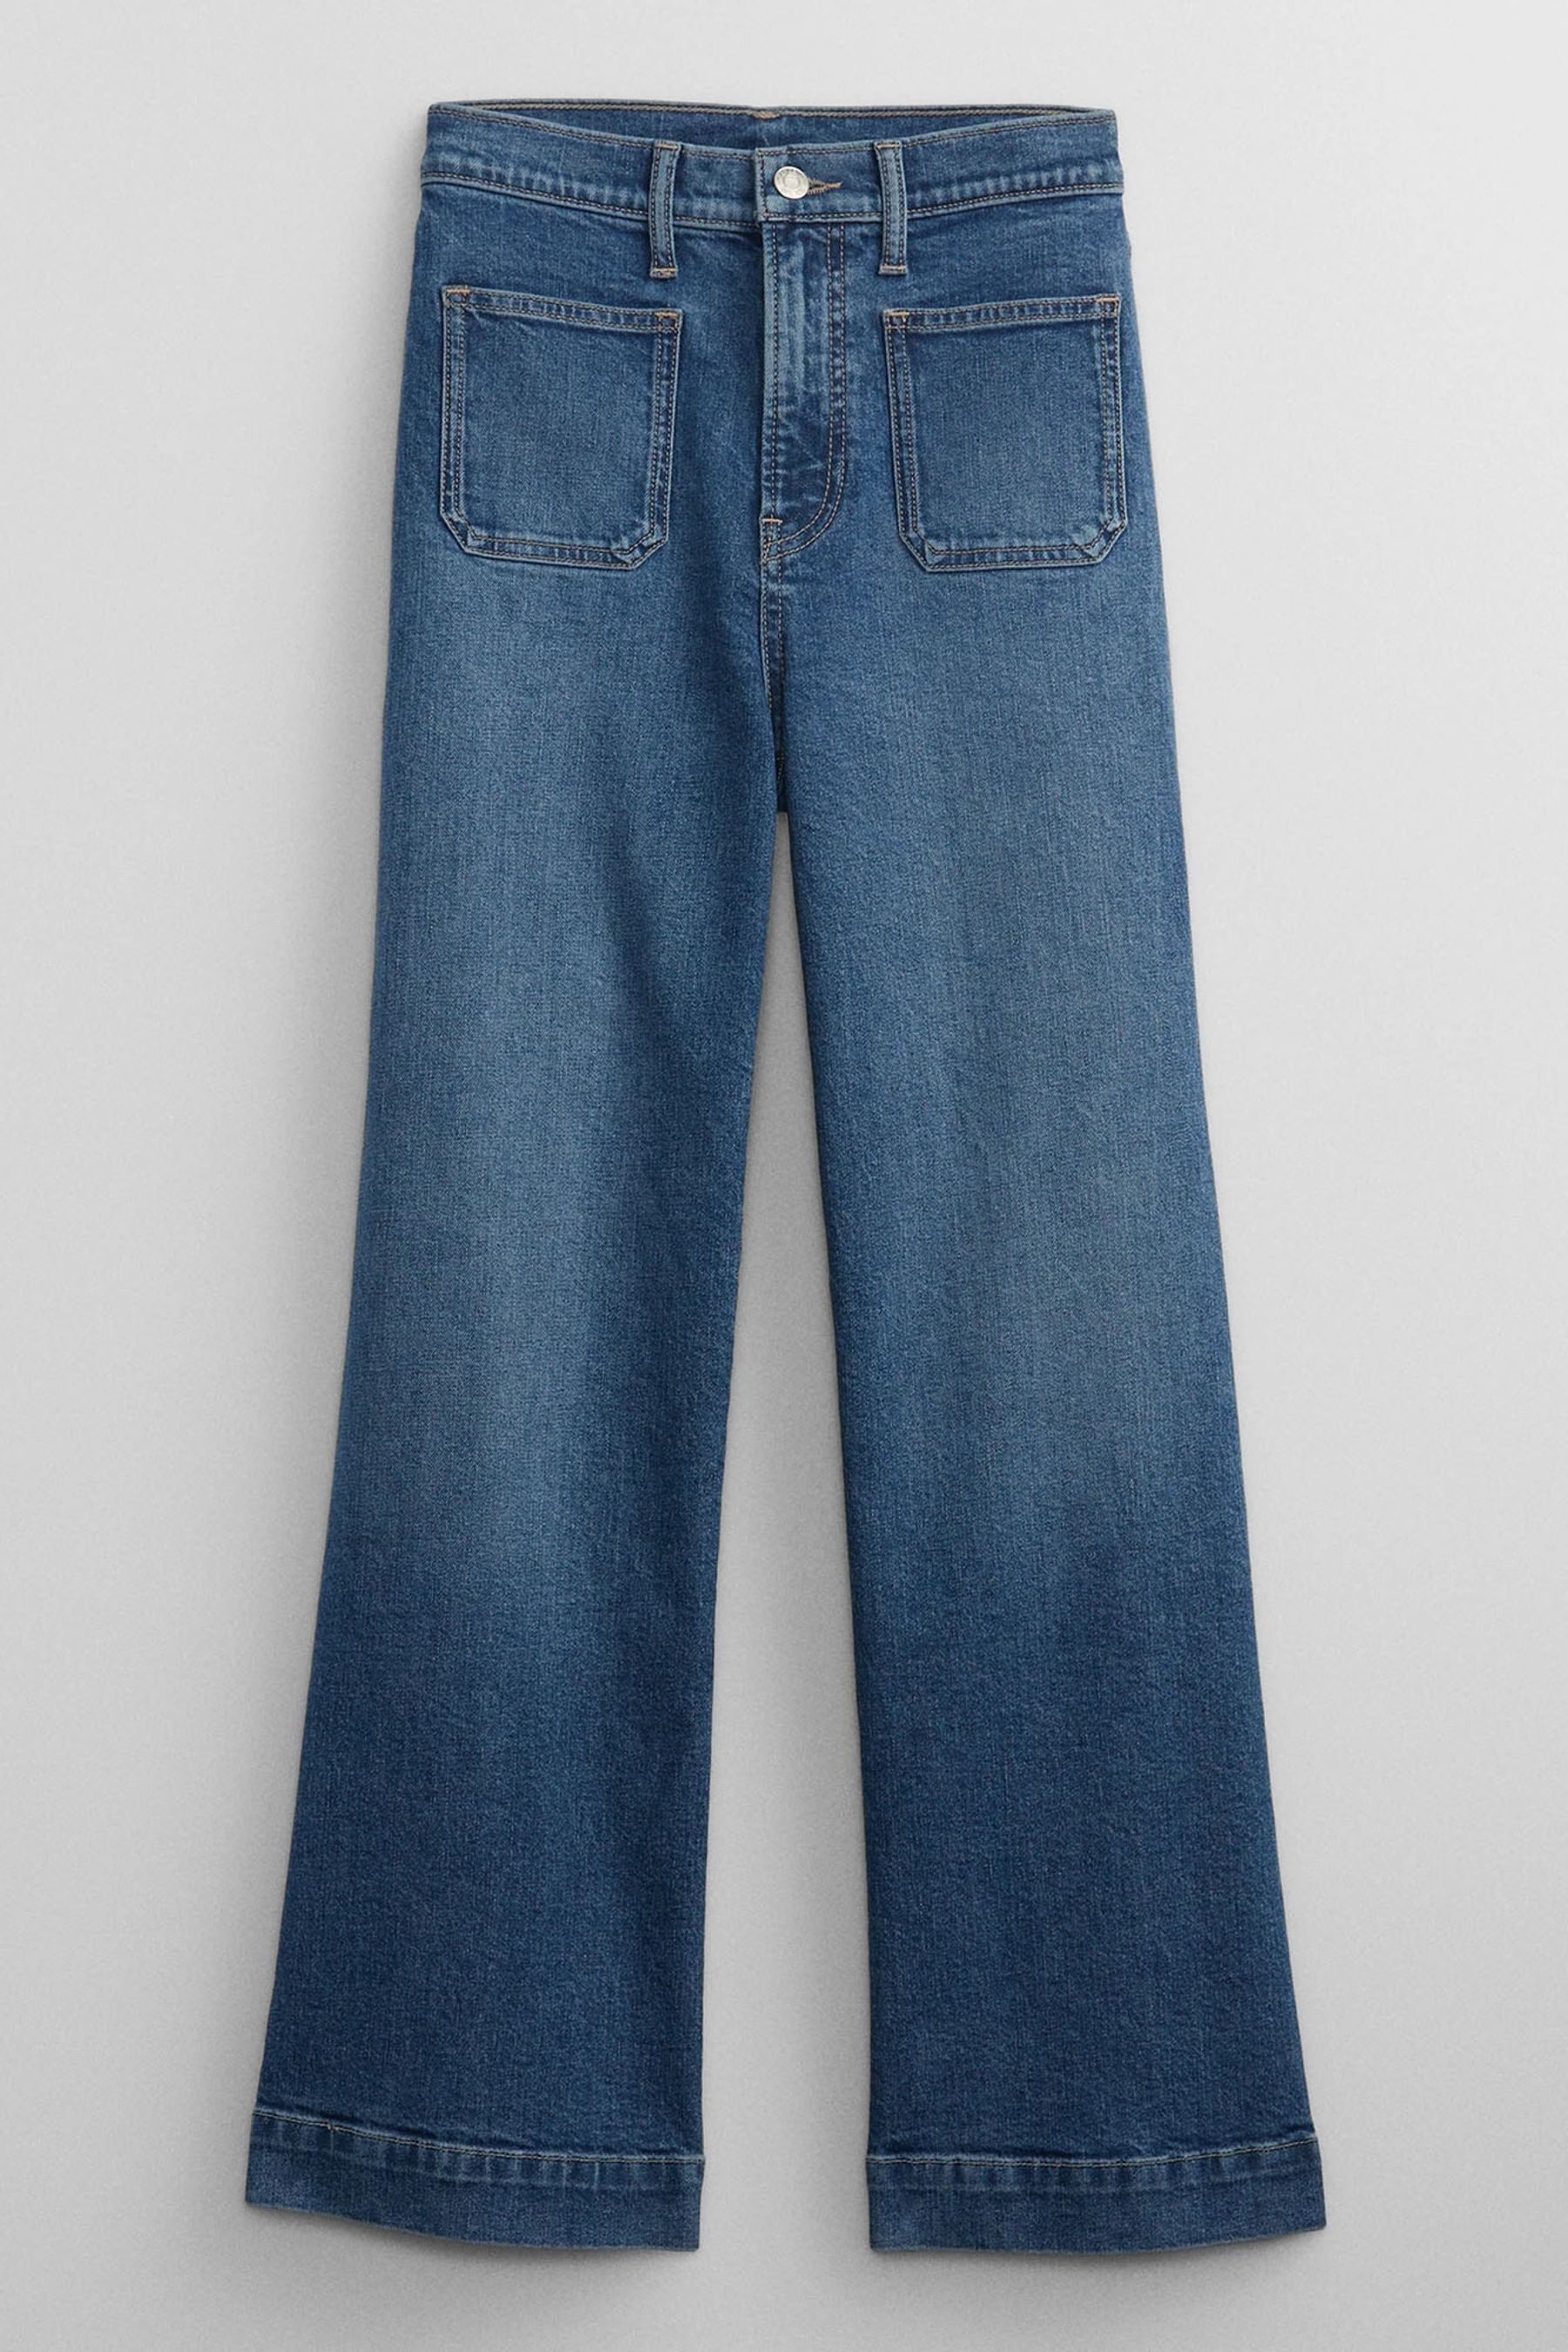 Buy Mid Wash Blue High Waisted Wide Leg Cropped Jeans from the Gap ...